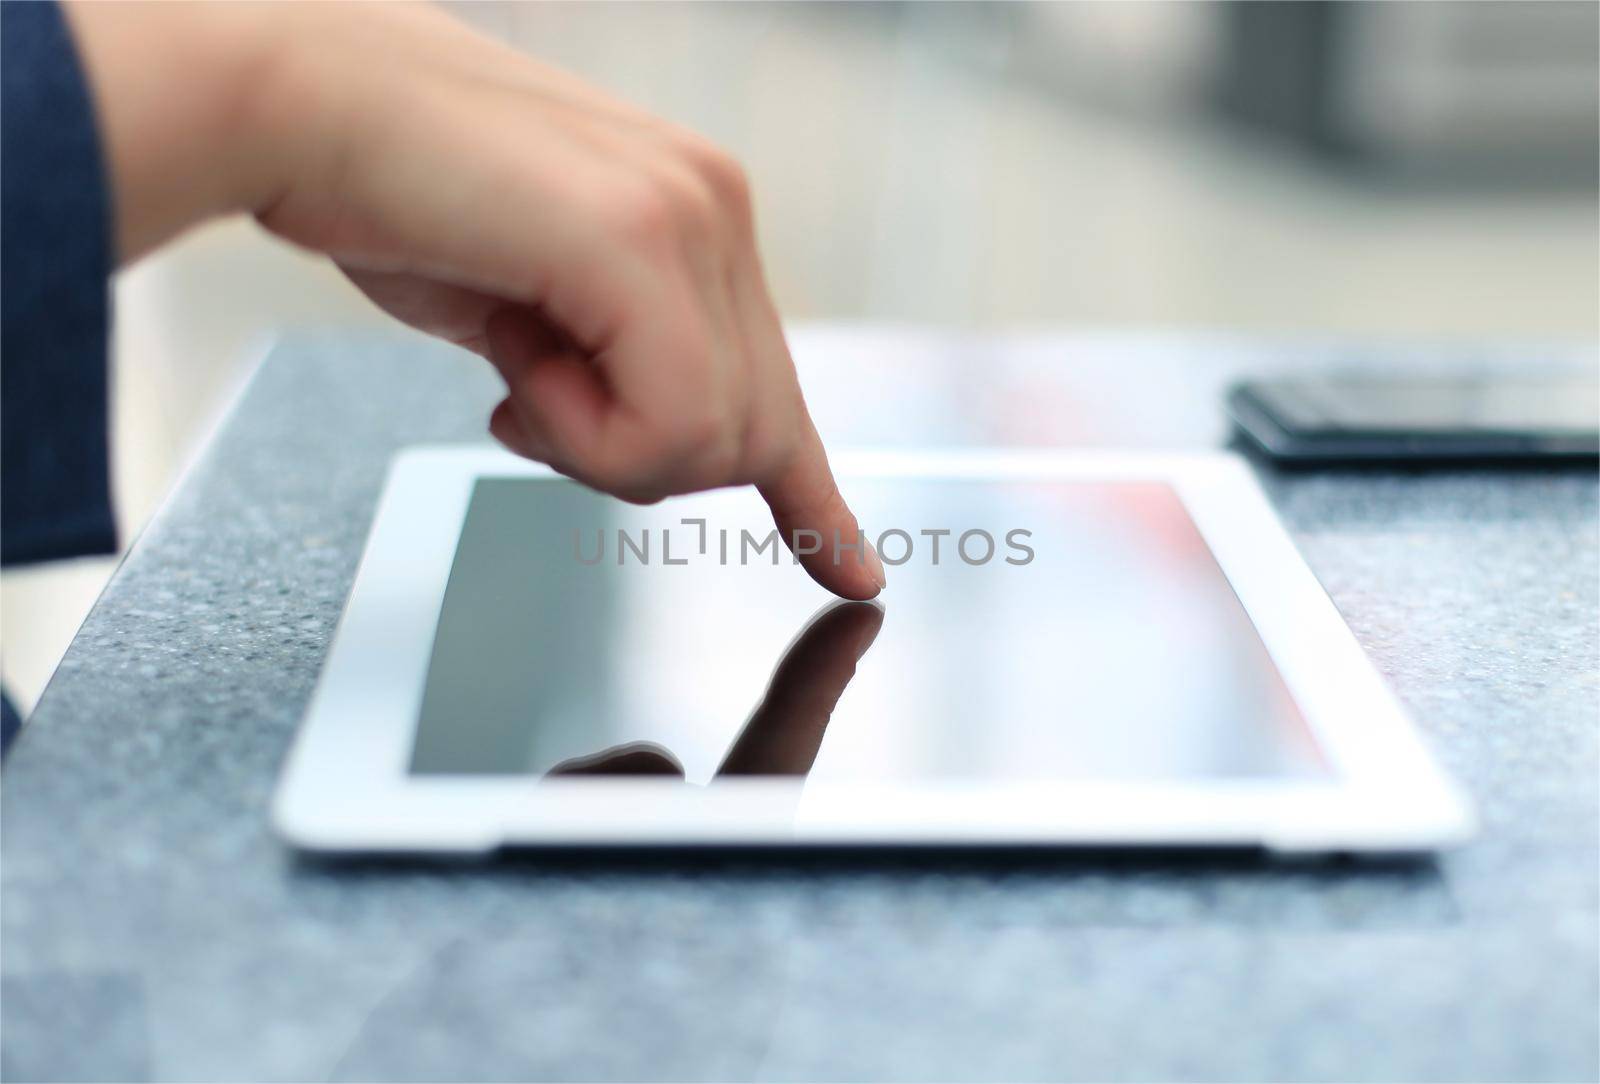 Woman hand touching screen on modern digital tablet pc. Close-up image with shallow depth of field focus on finger.